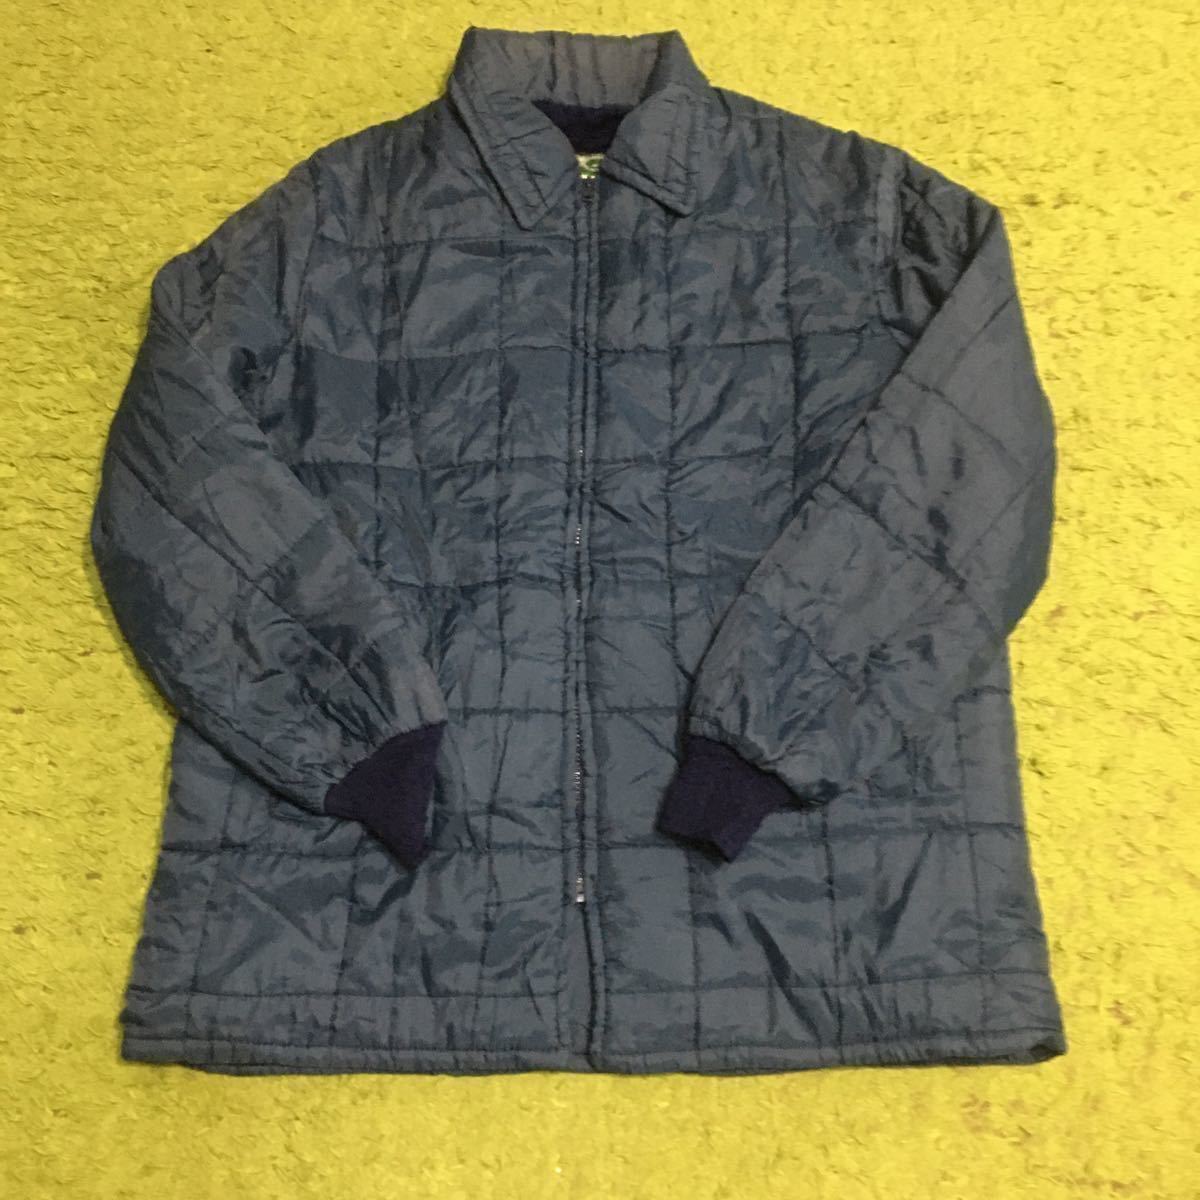 【made in USA】it's extra rare 80's outdoorclothing deadstock/HABAND OF PATERSON NEWJERSEY/quiltingjacket/bluebody/size L/JPN LL/